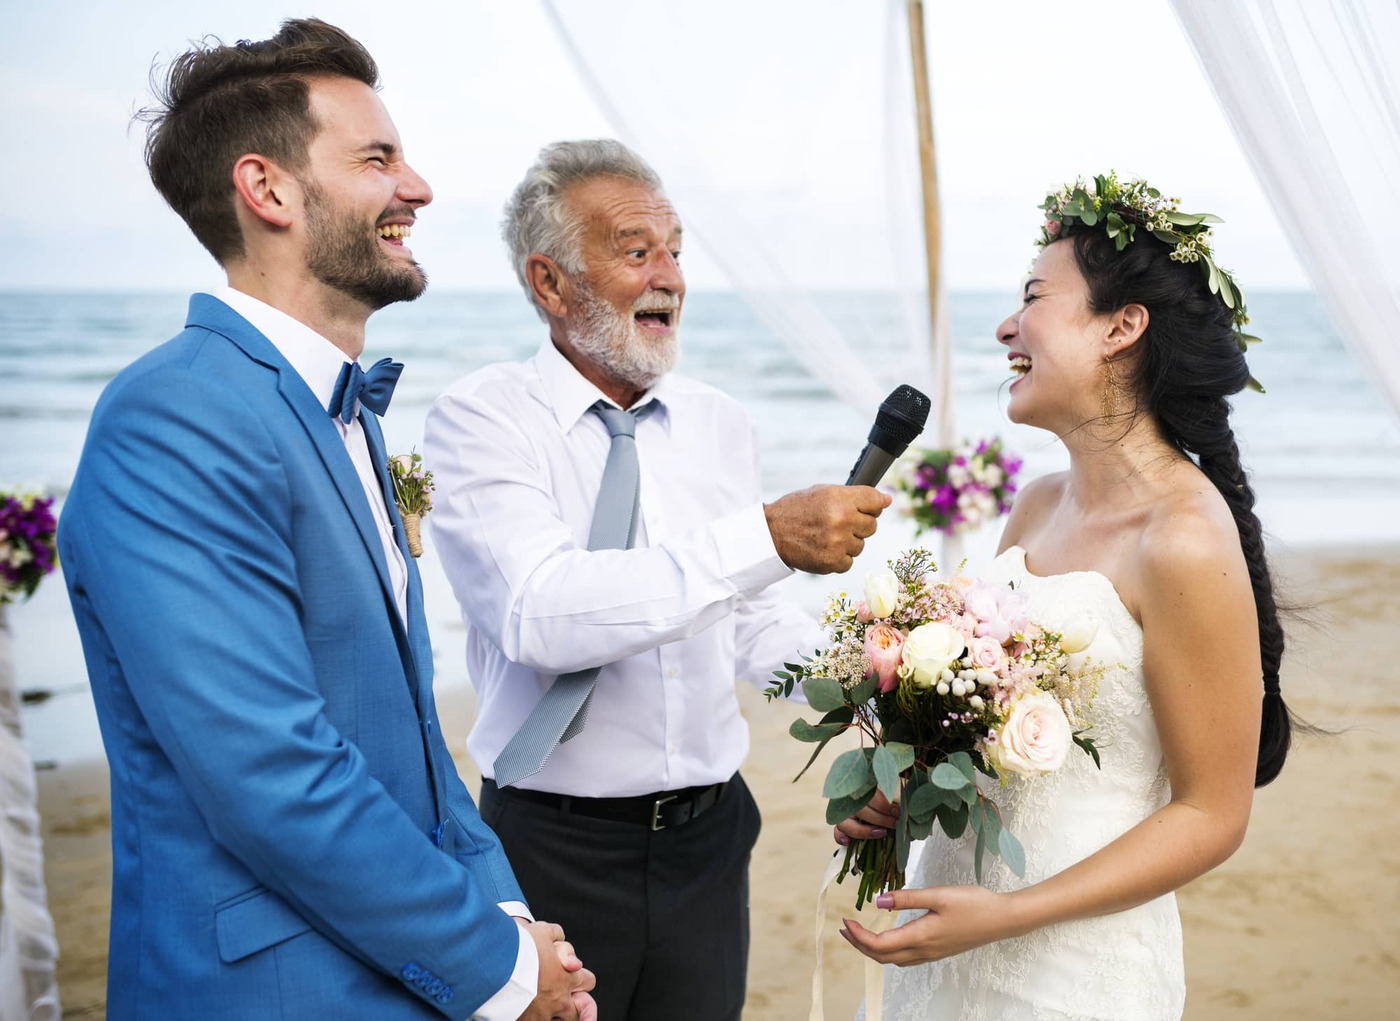 Wedding Pioneer is a platform that helps couples connect with photographers, vendors, and wedding planners.